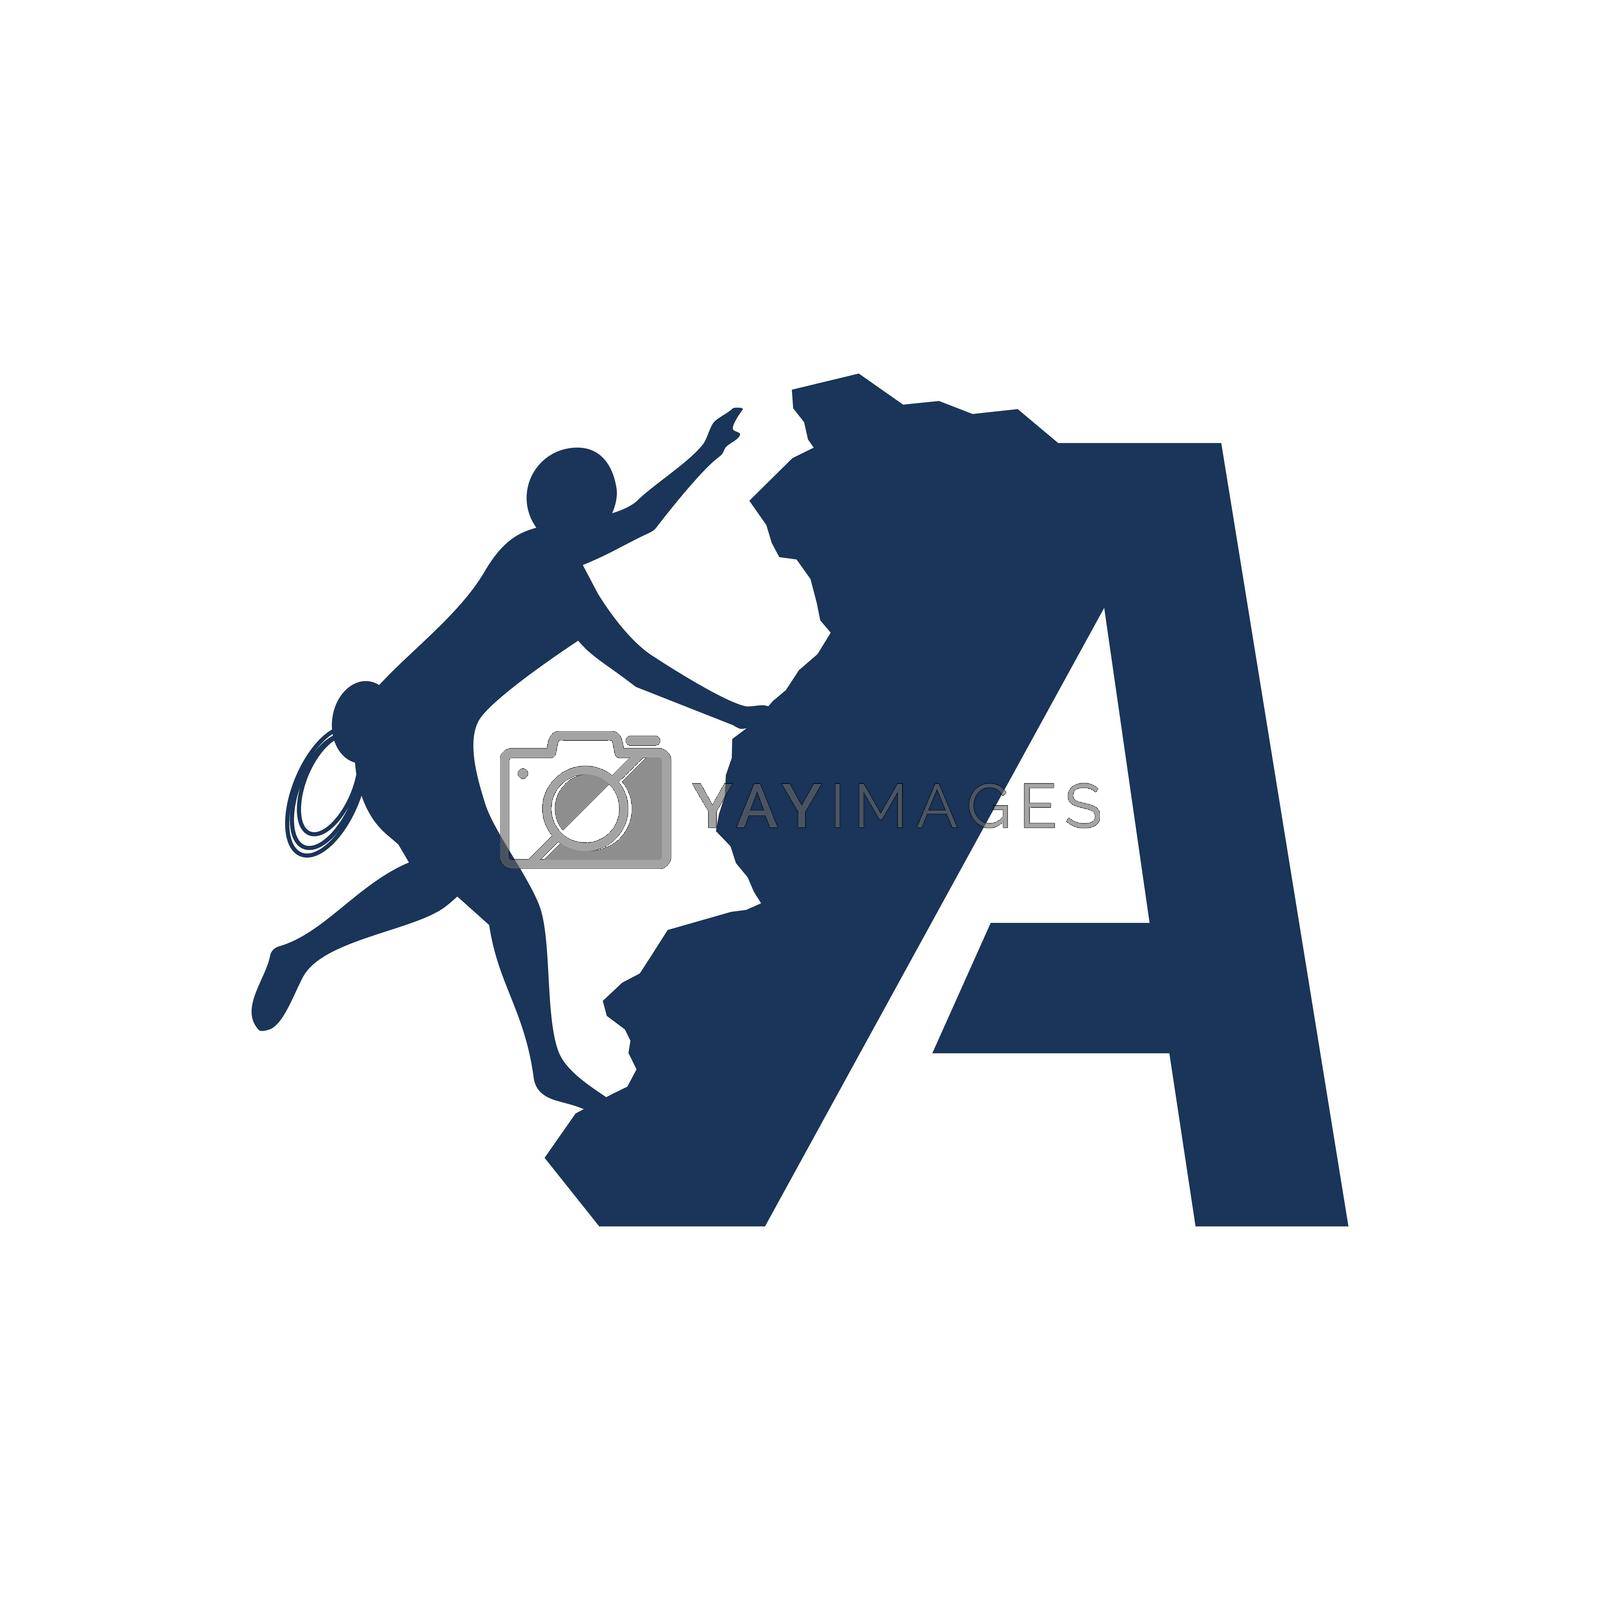 Royalty free image of Rock climber logo with alphabet by awk